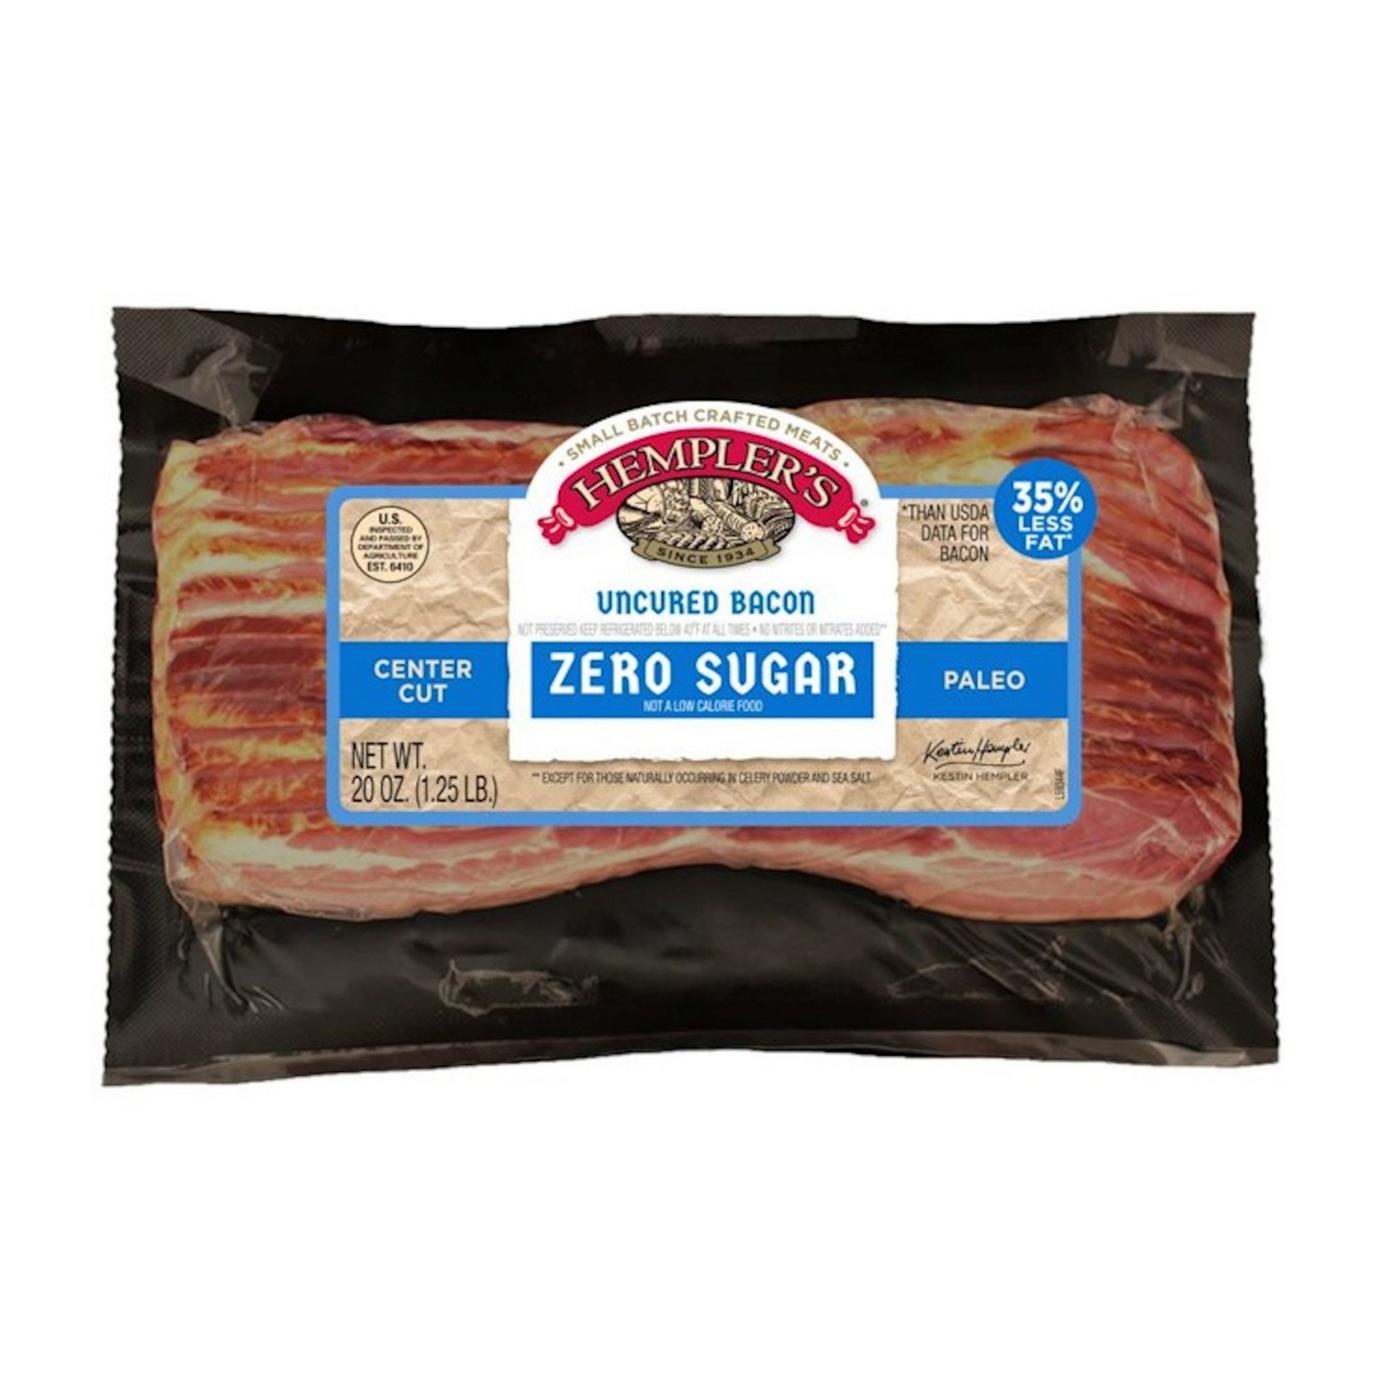 Hempler's No Sugar Added Uncured Center Cut Bacon; image 1 of 2